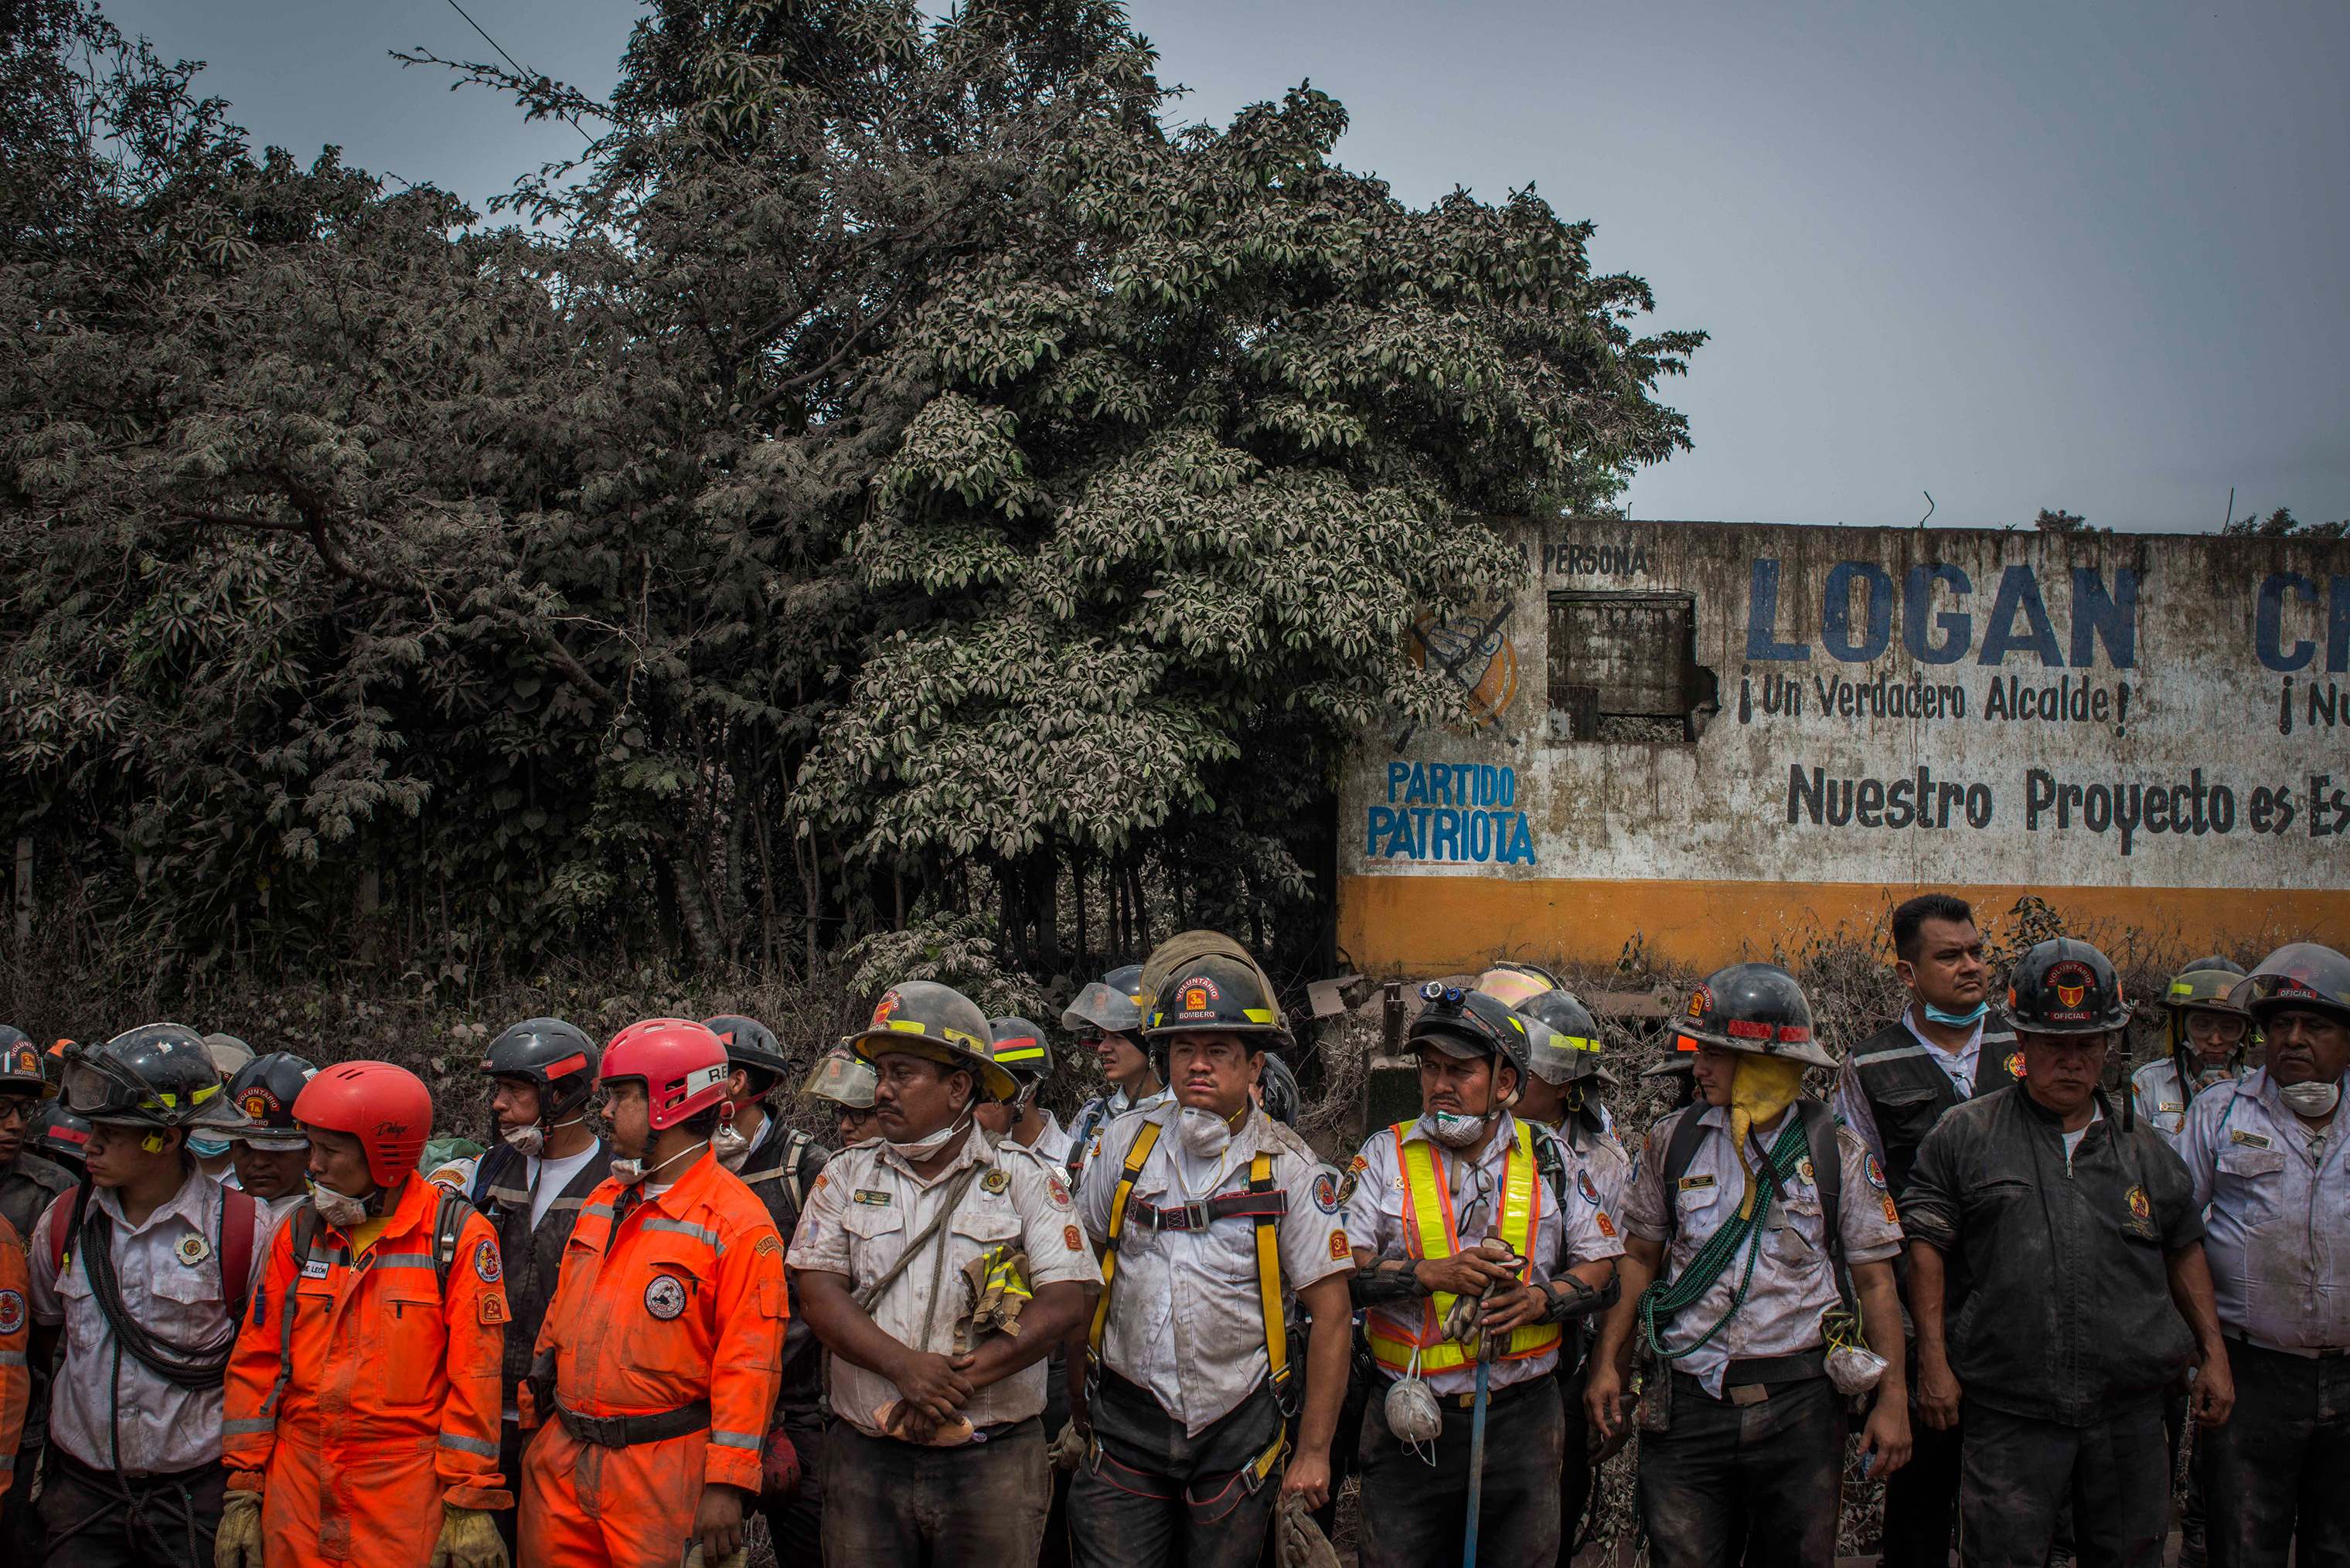 Rescue workers in between search missions in San Miguel Los Lotes on June 4. (Daniele Volpe)